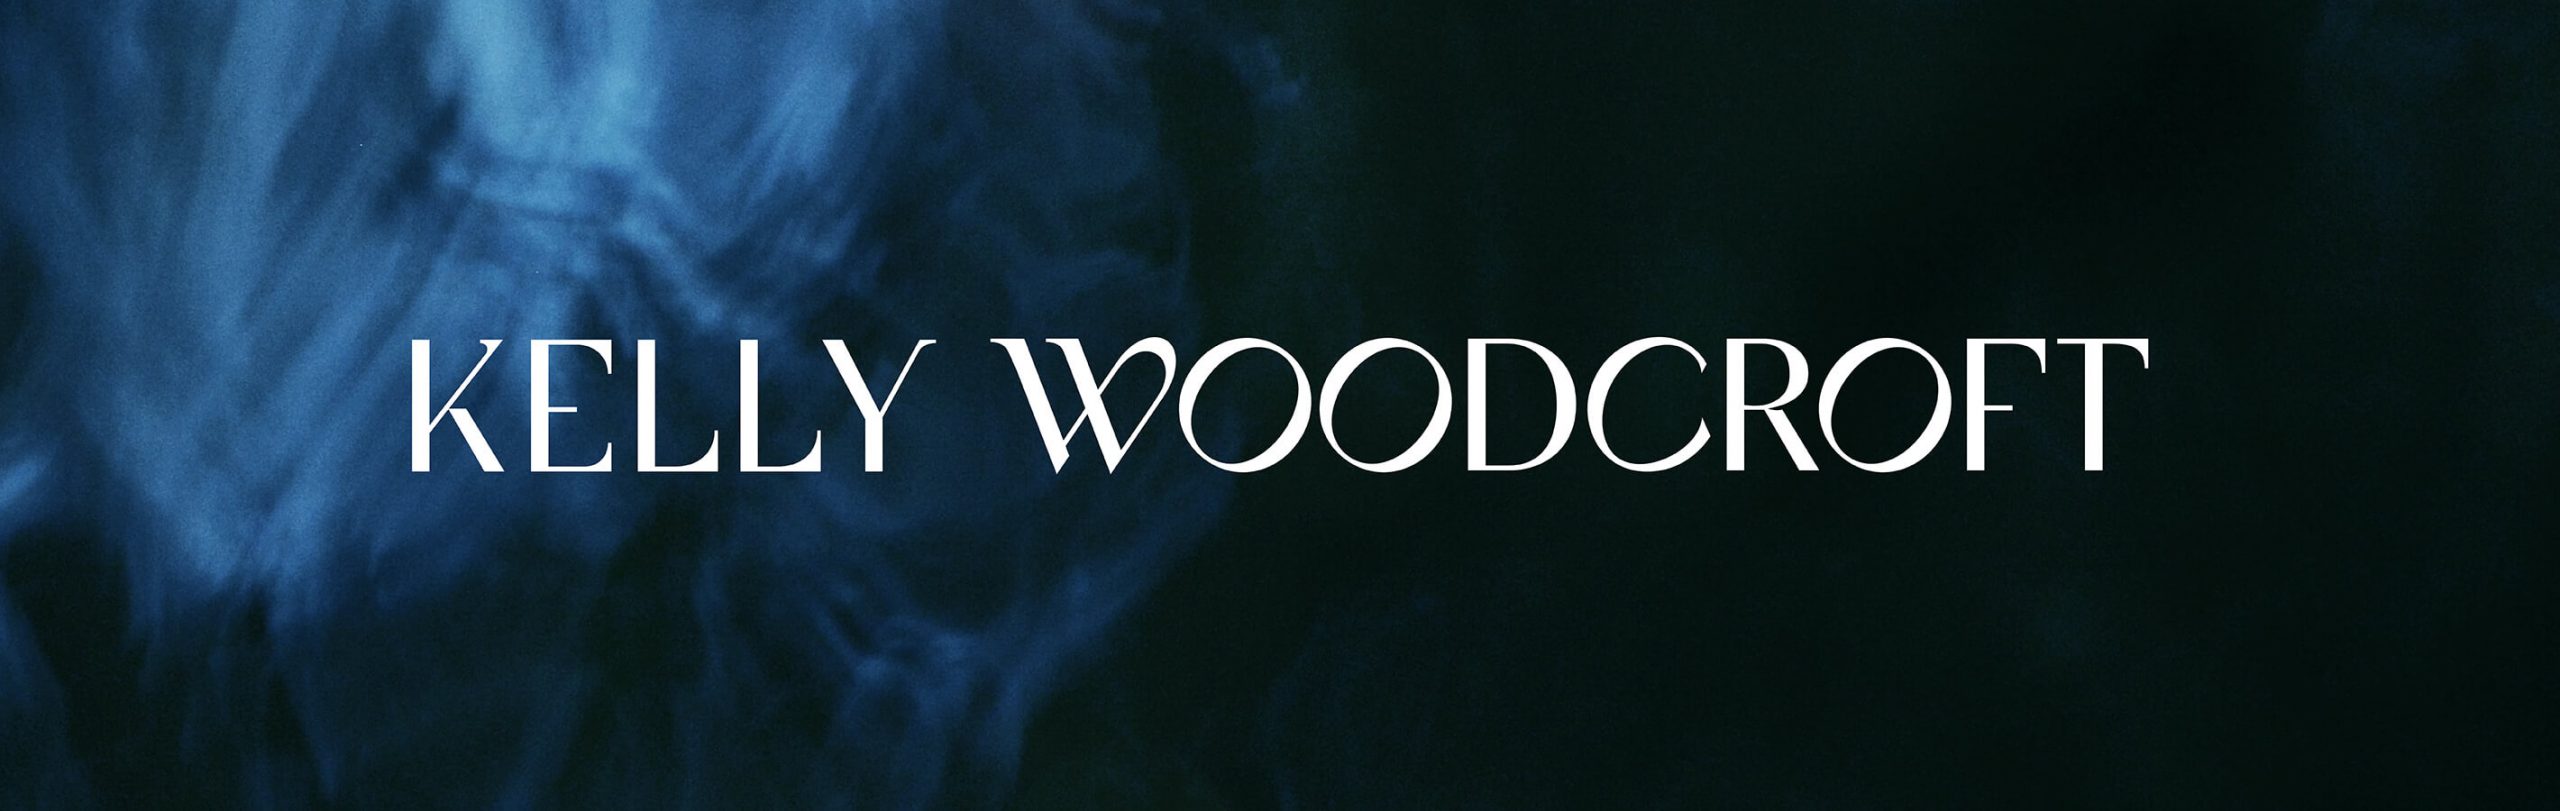 The sophosticated logo design for Kelly Woodcroft sits on a deep blue background